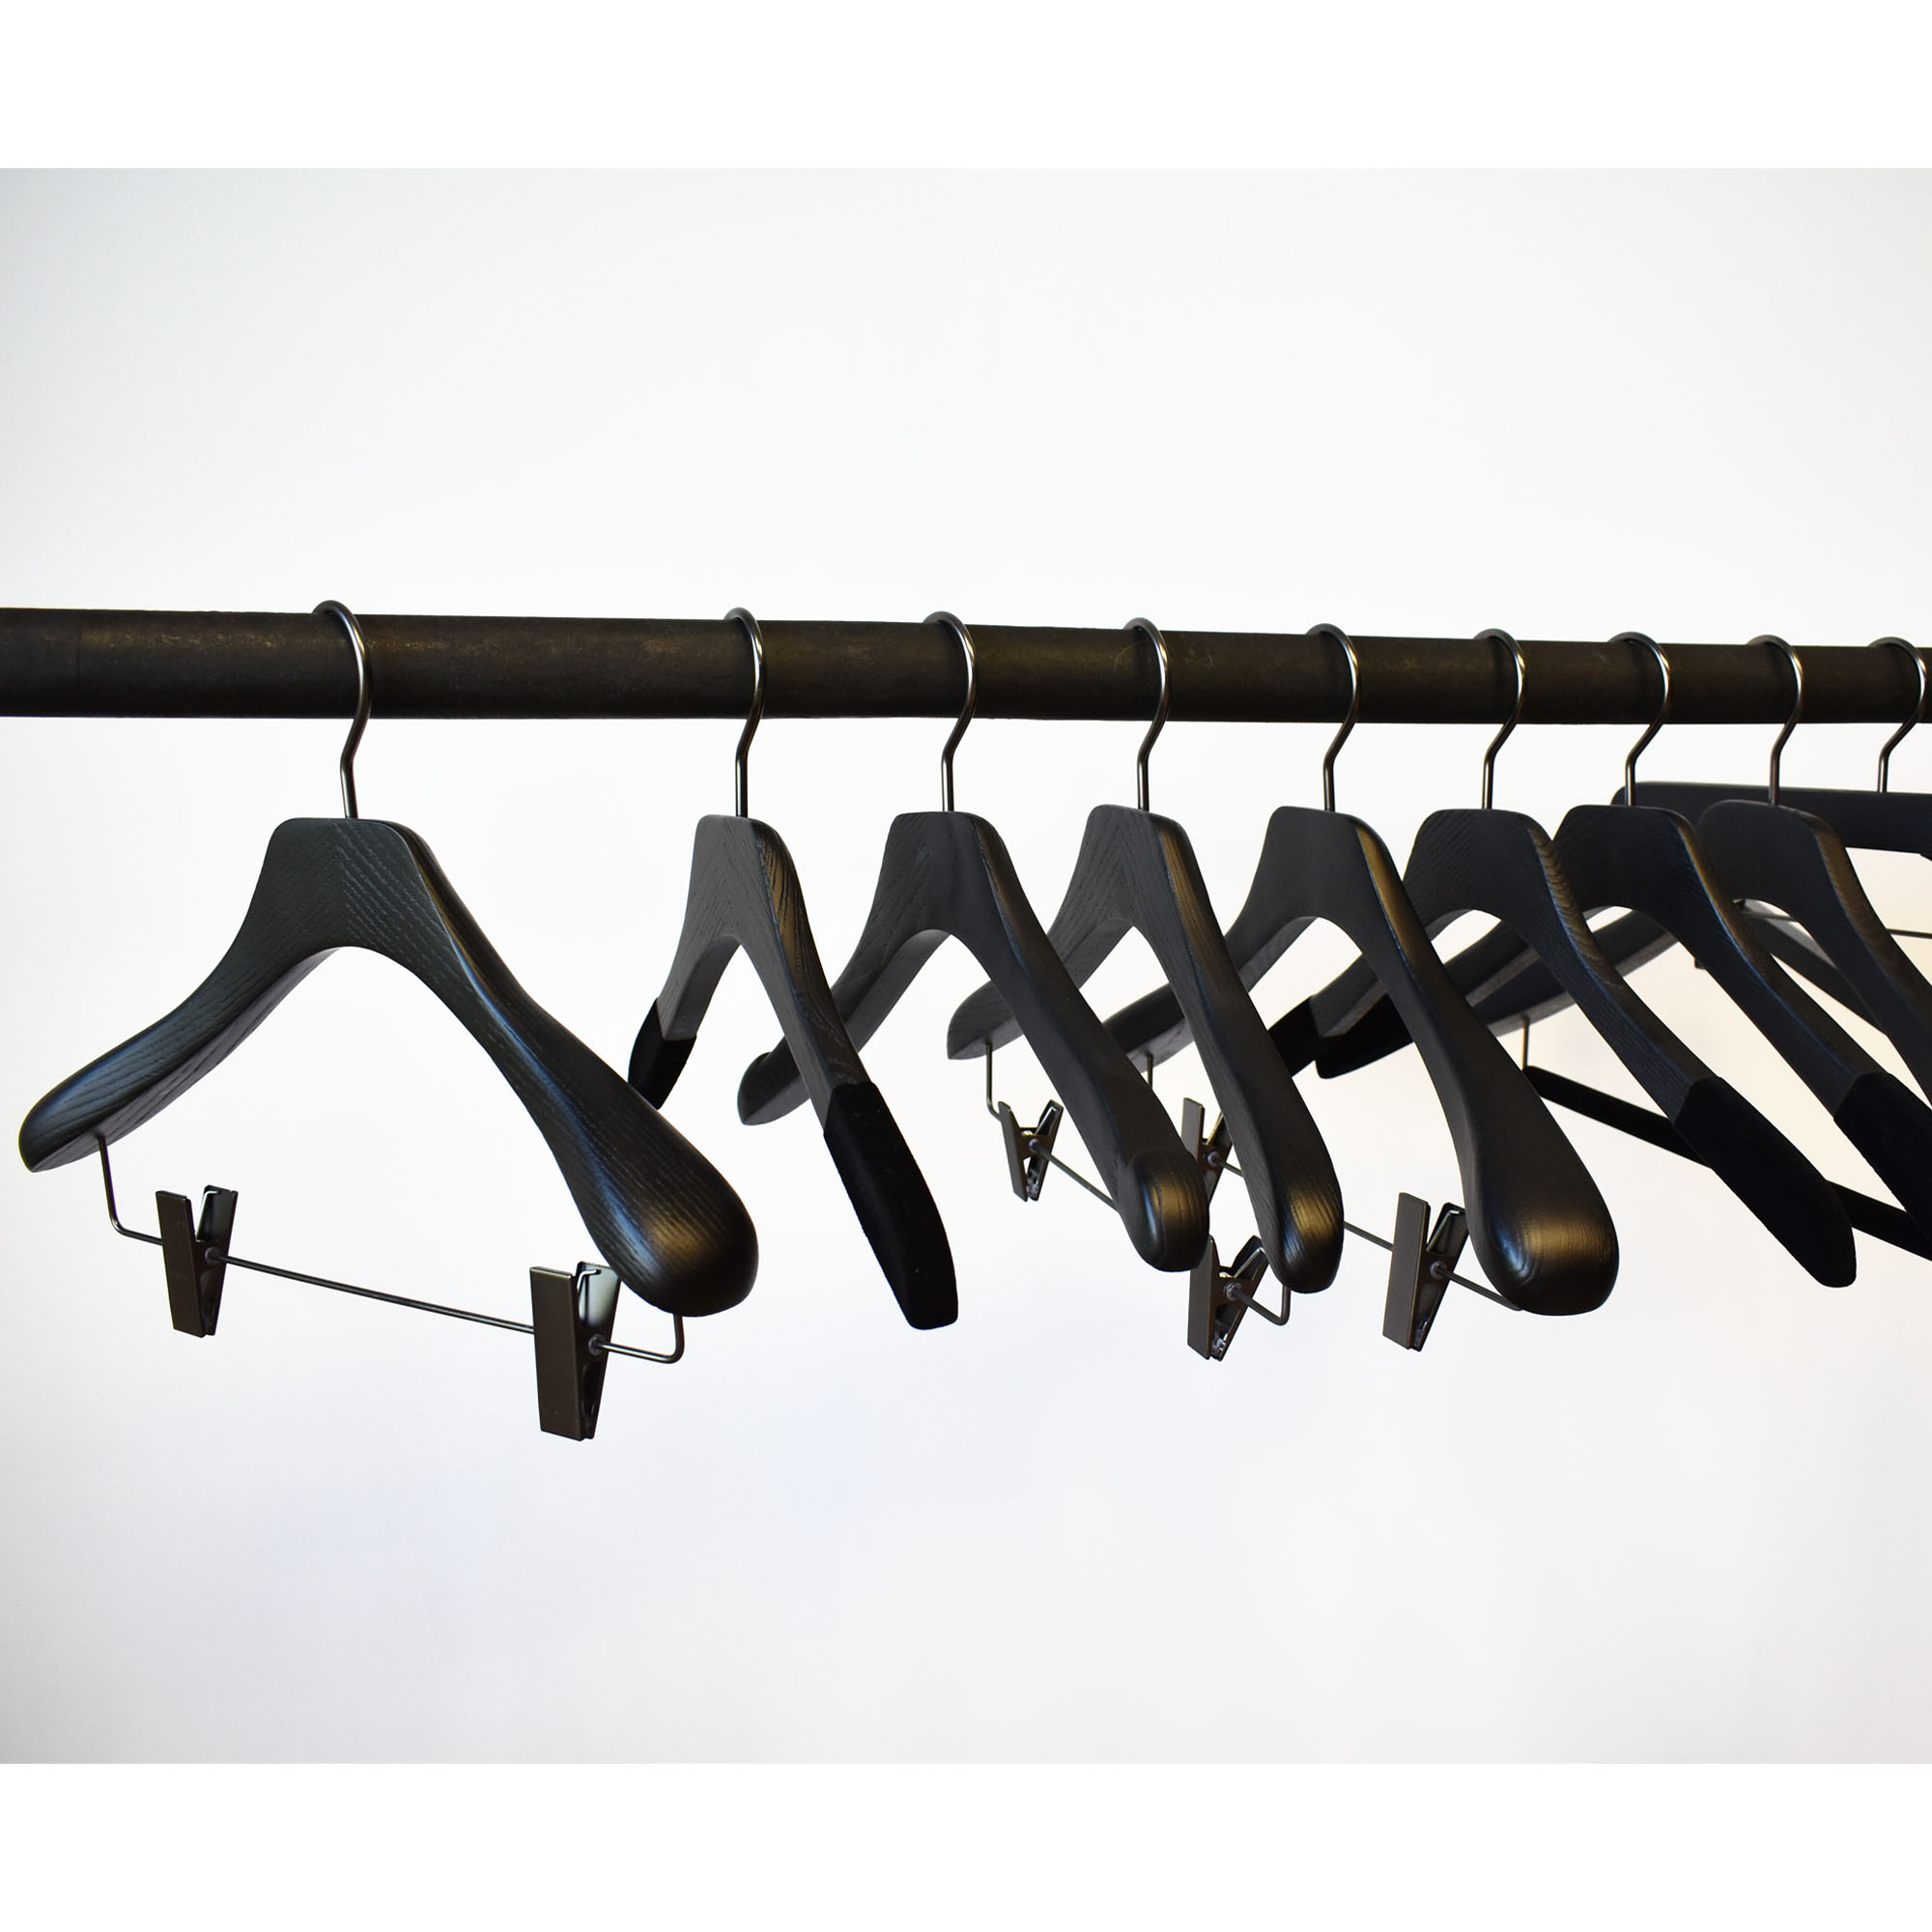 Black wooden hangers with clips for jacket and suit